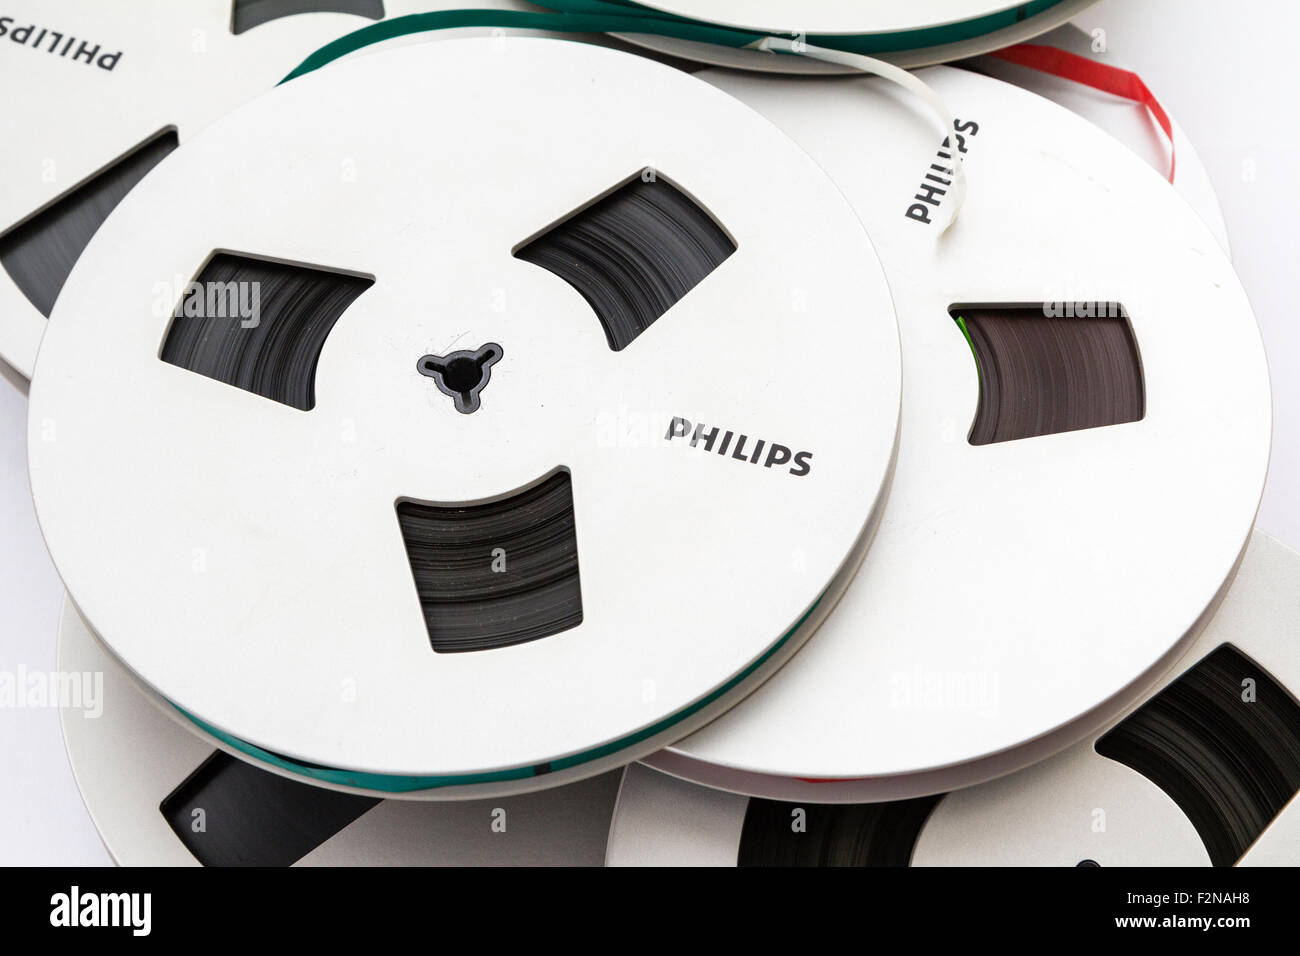 Several Philips reel to reel magnetic tape reels in a scattered